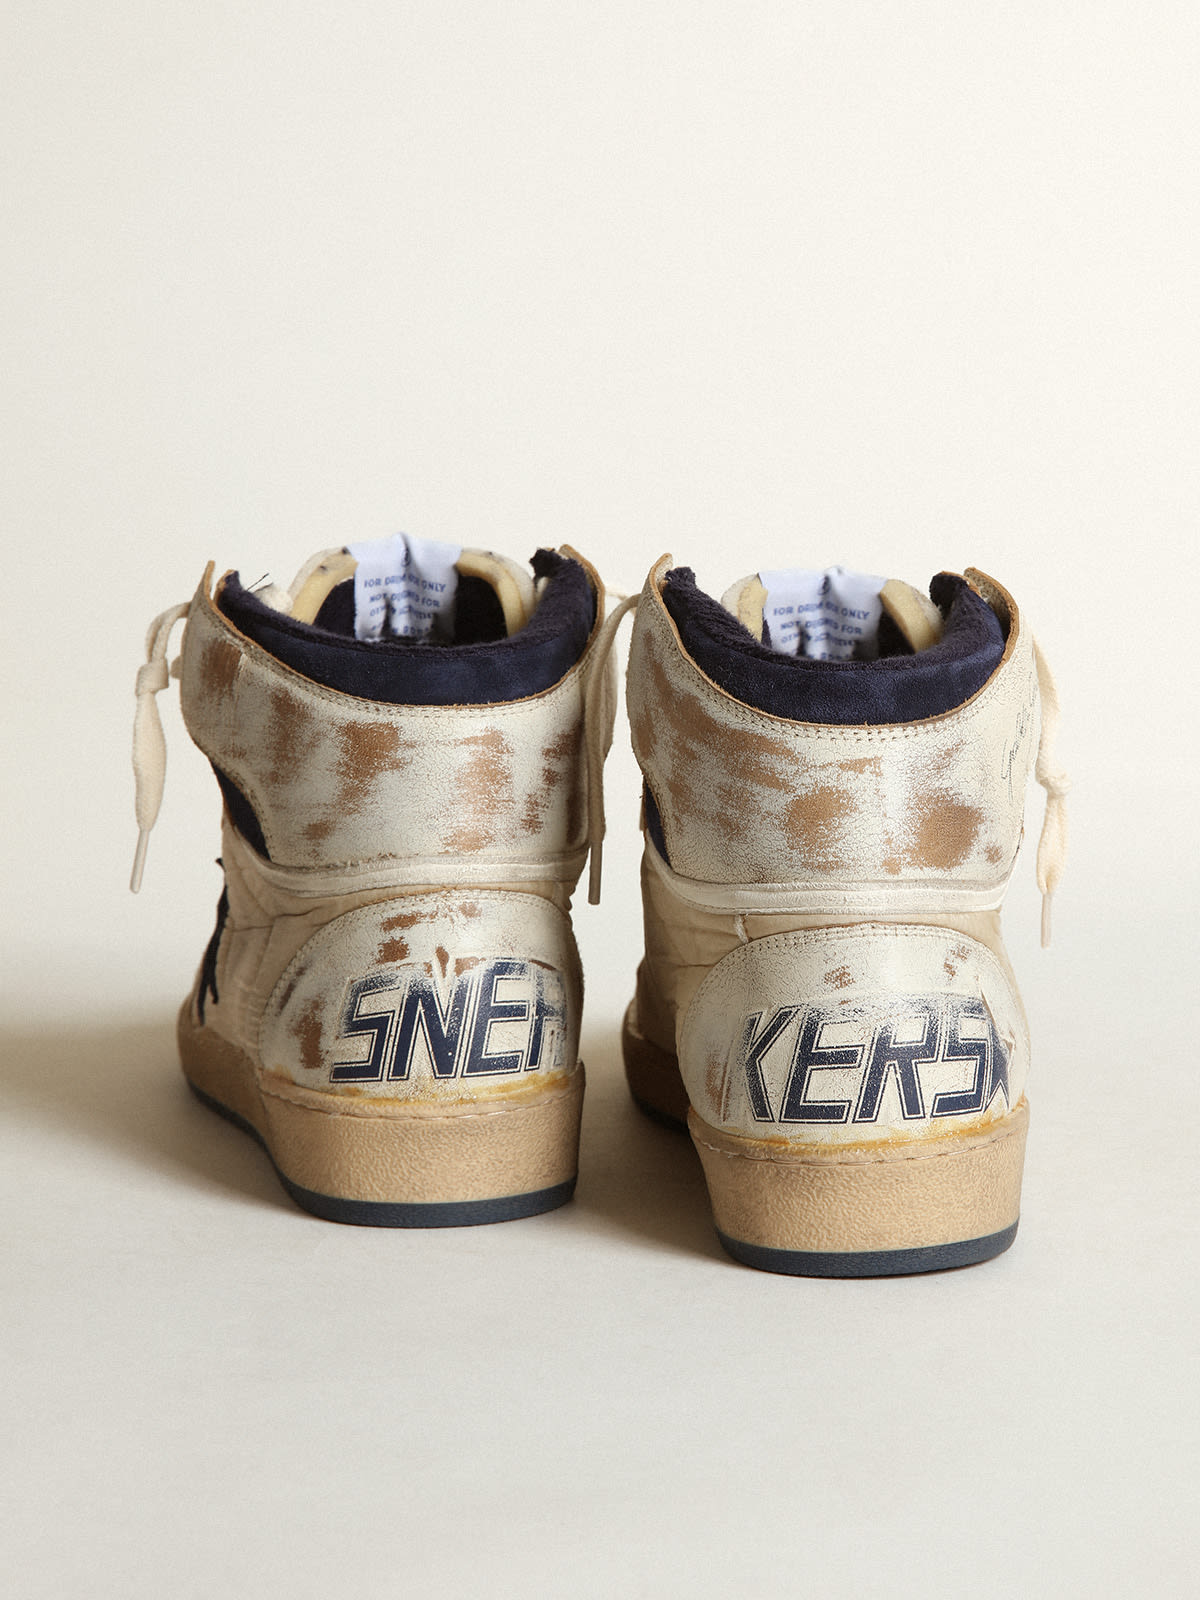 Golden Goose - Men’s Sky-Star sneakers in cream-colored nylon and white leather with dark blue suede star in 